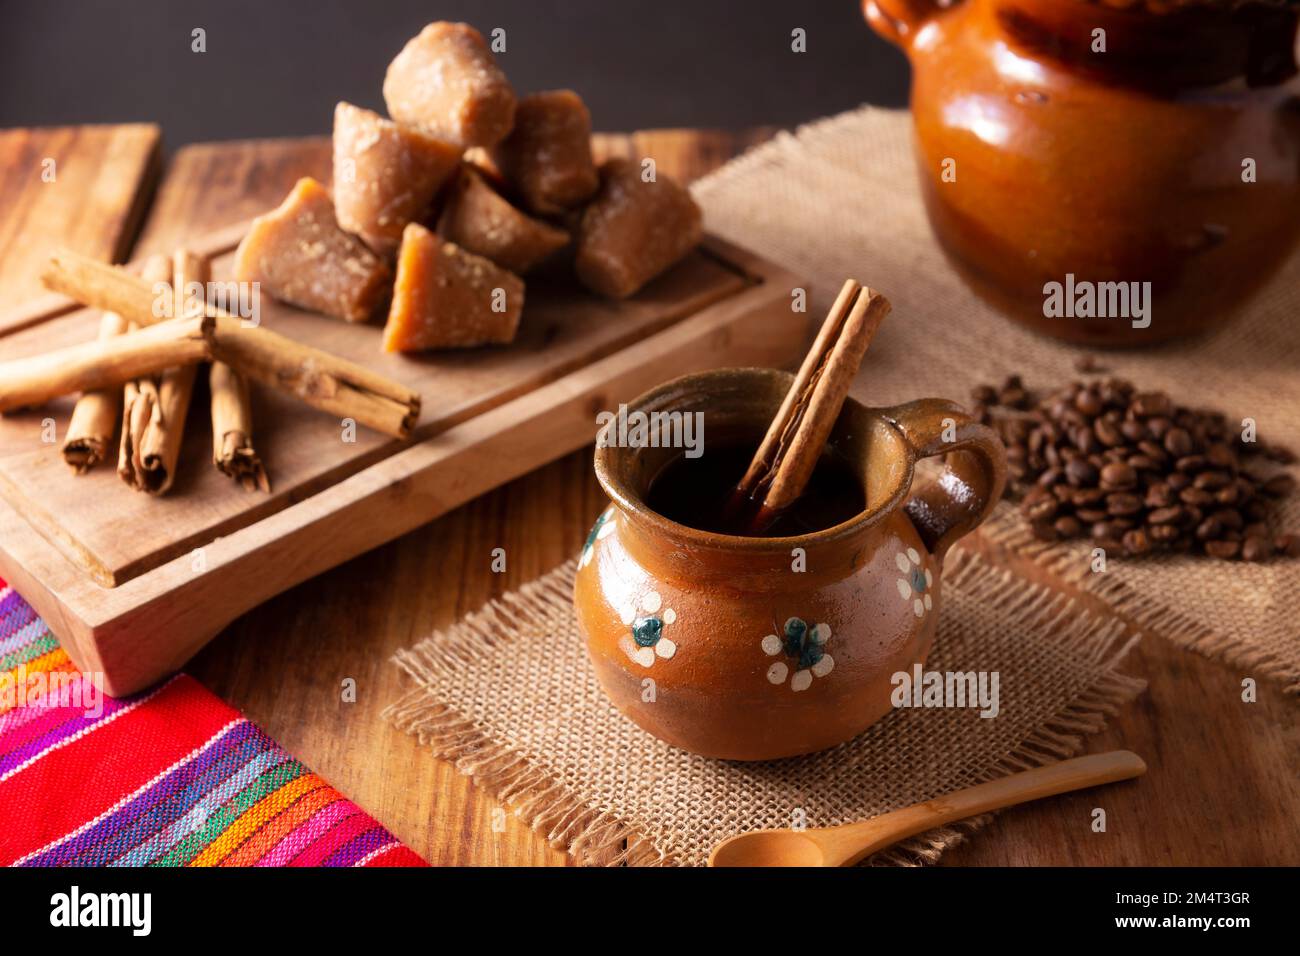 Authentic homemade mexican coffee (cafe de olla) served in traditional handmade clay mug (Jarrito de barro) on rustic wooden table. Stock Photo